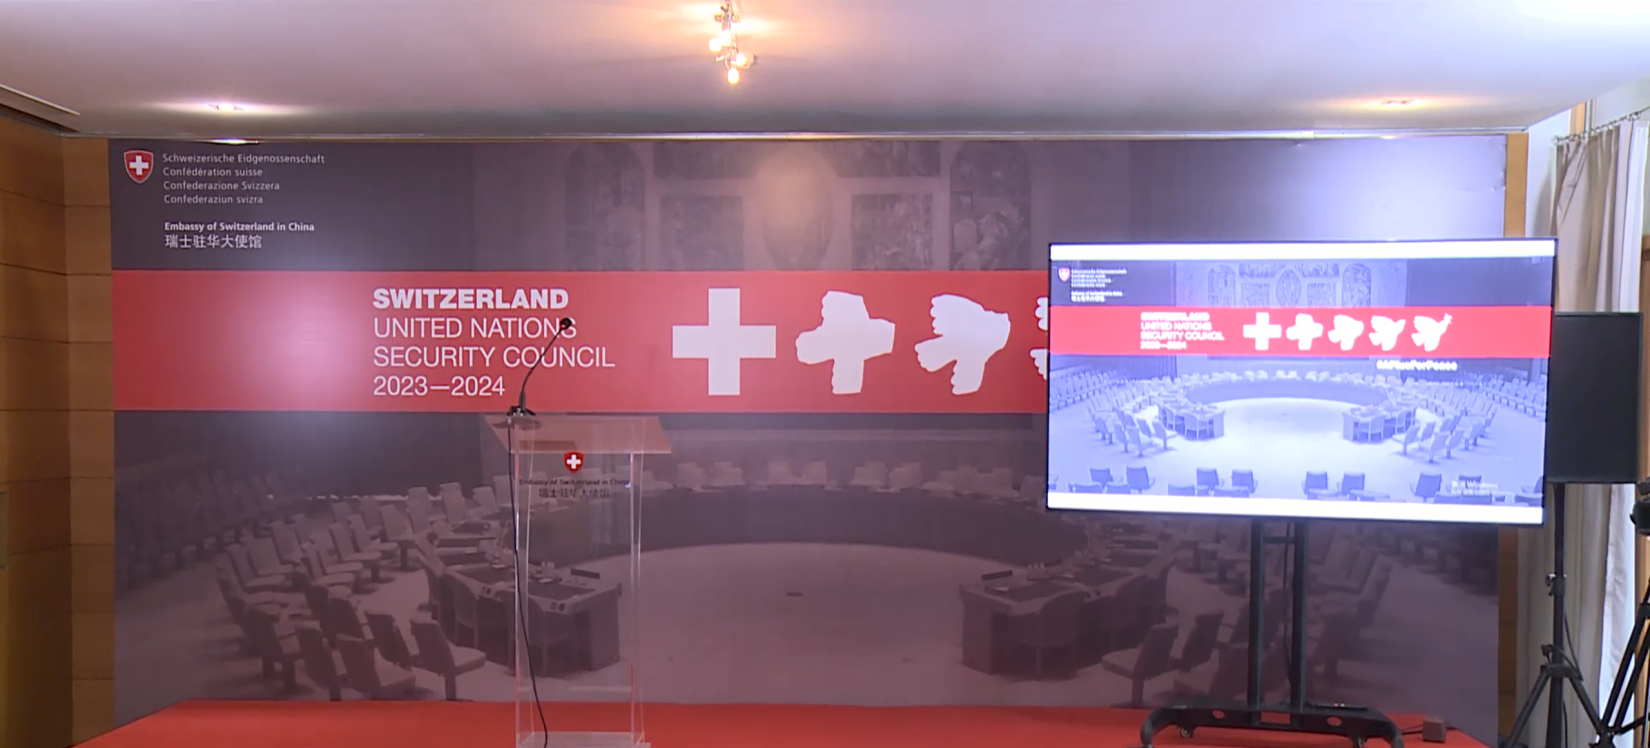 “A Plus of Peace” event: Switzerland’s election as member of the United Nations Security Council for the Period 2023-2024